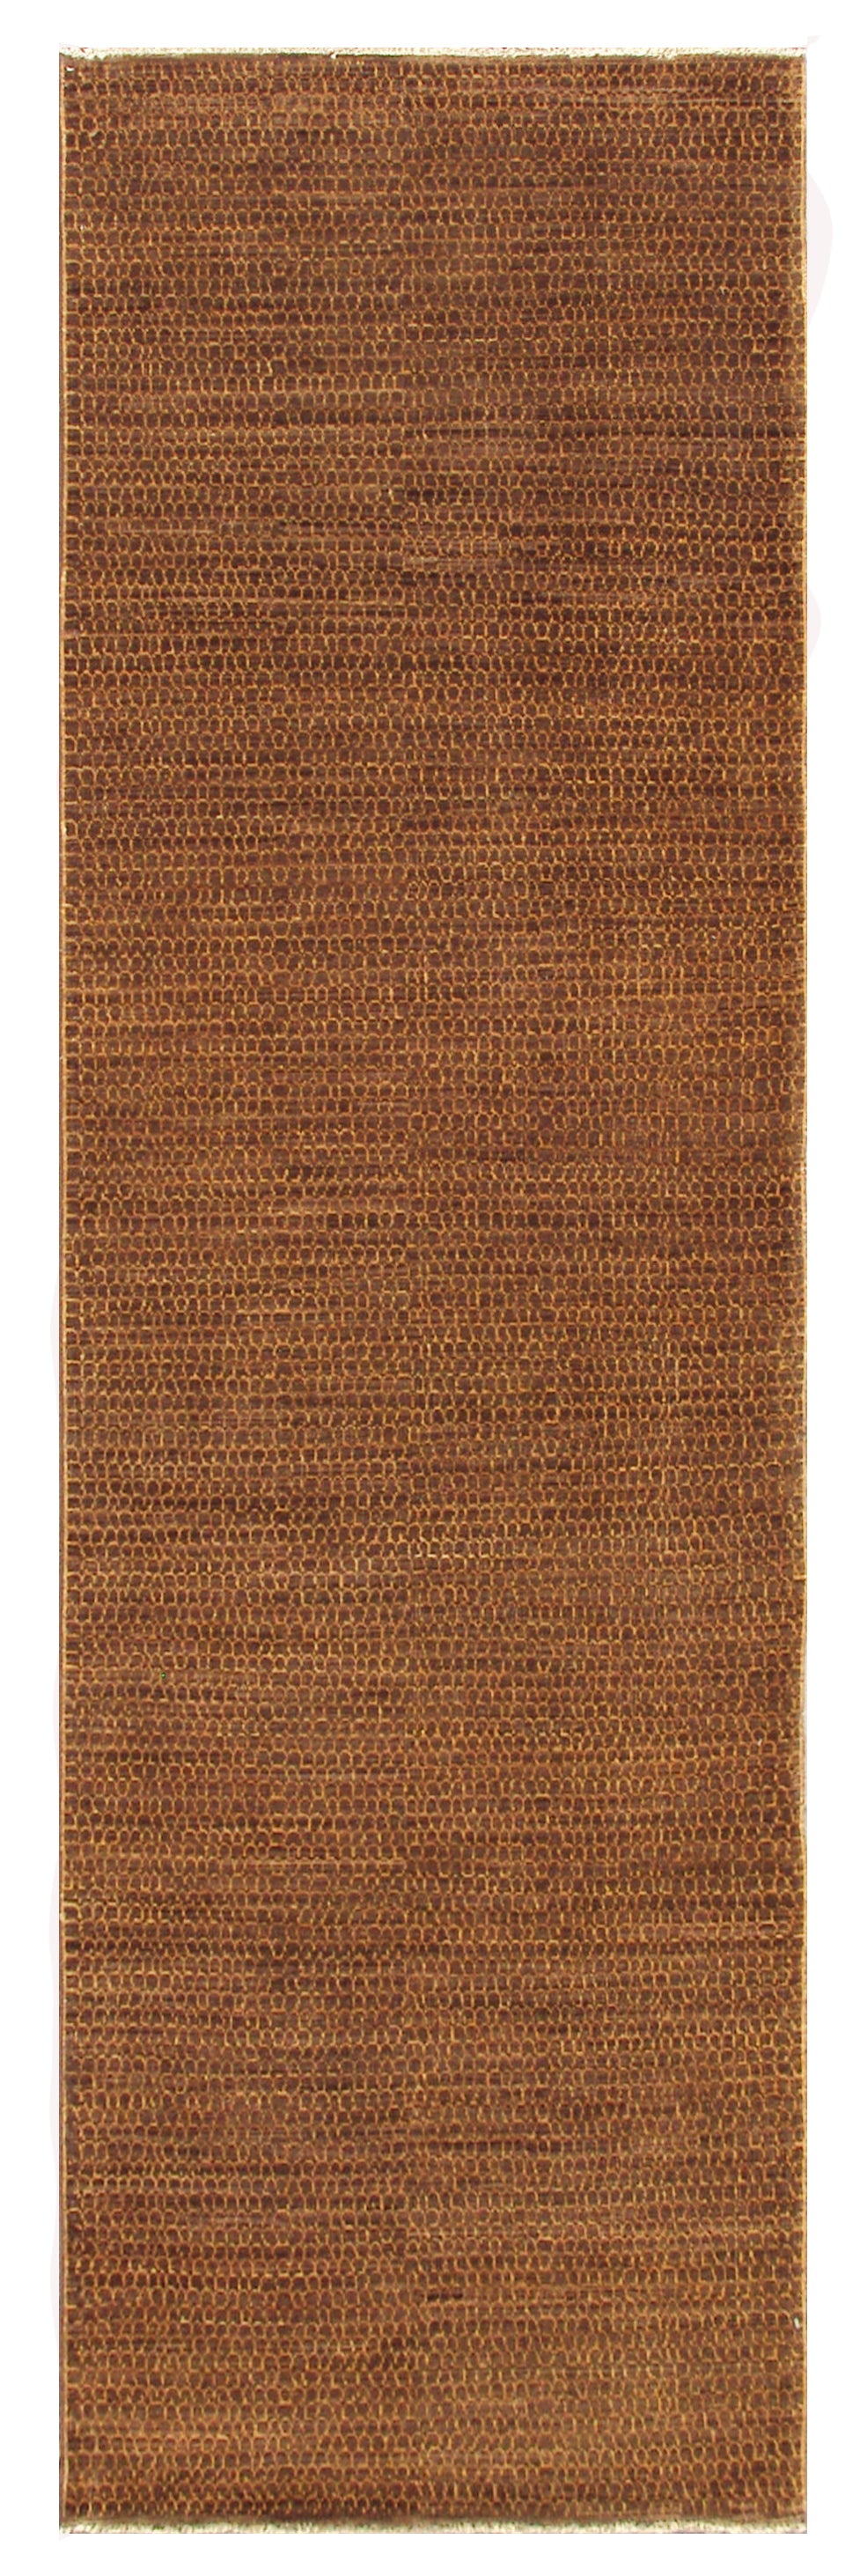 9.09 x  3.01 Gold Honeycomb Design Hand-knotted Ariana Modern Area Rug